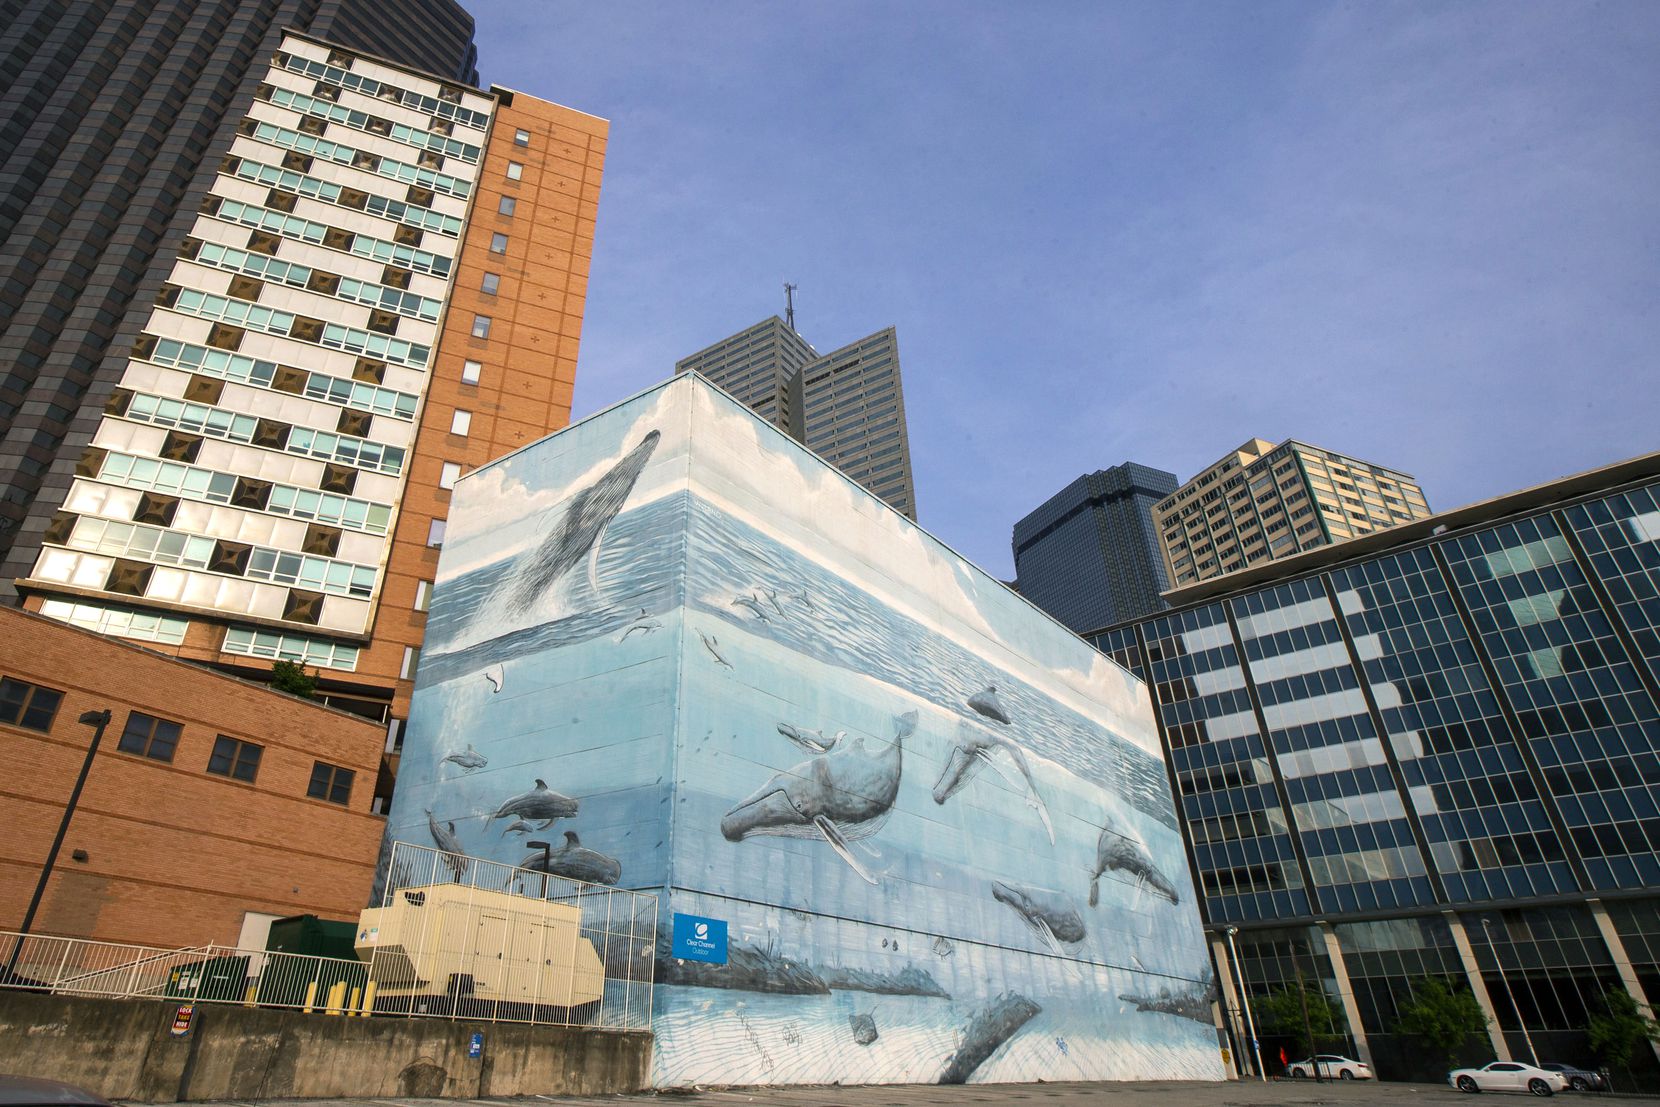 After recent advertising posters came down, a mural painted in 1999 by the artist and...